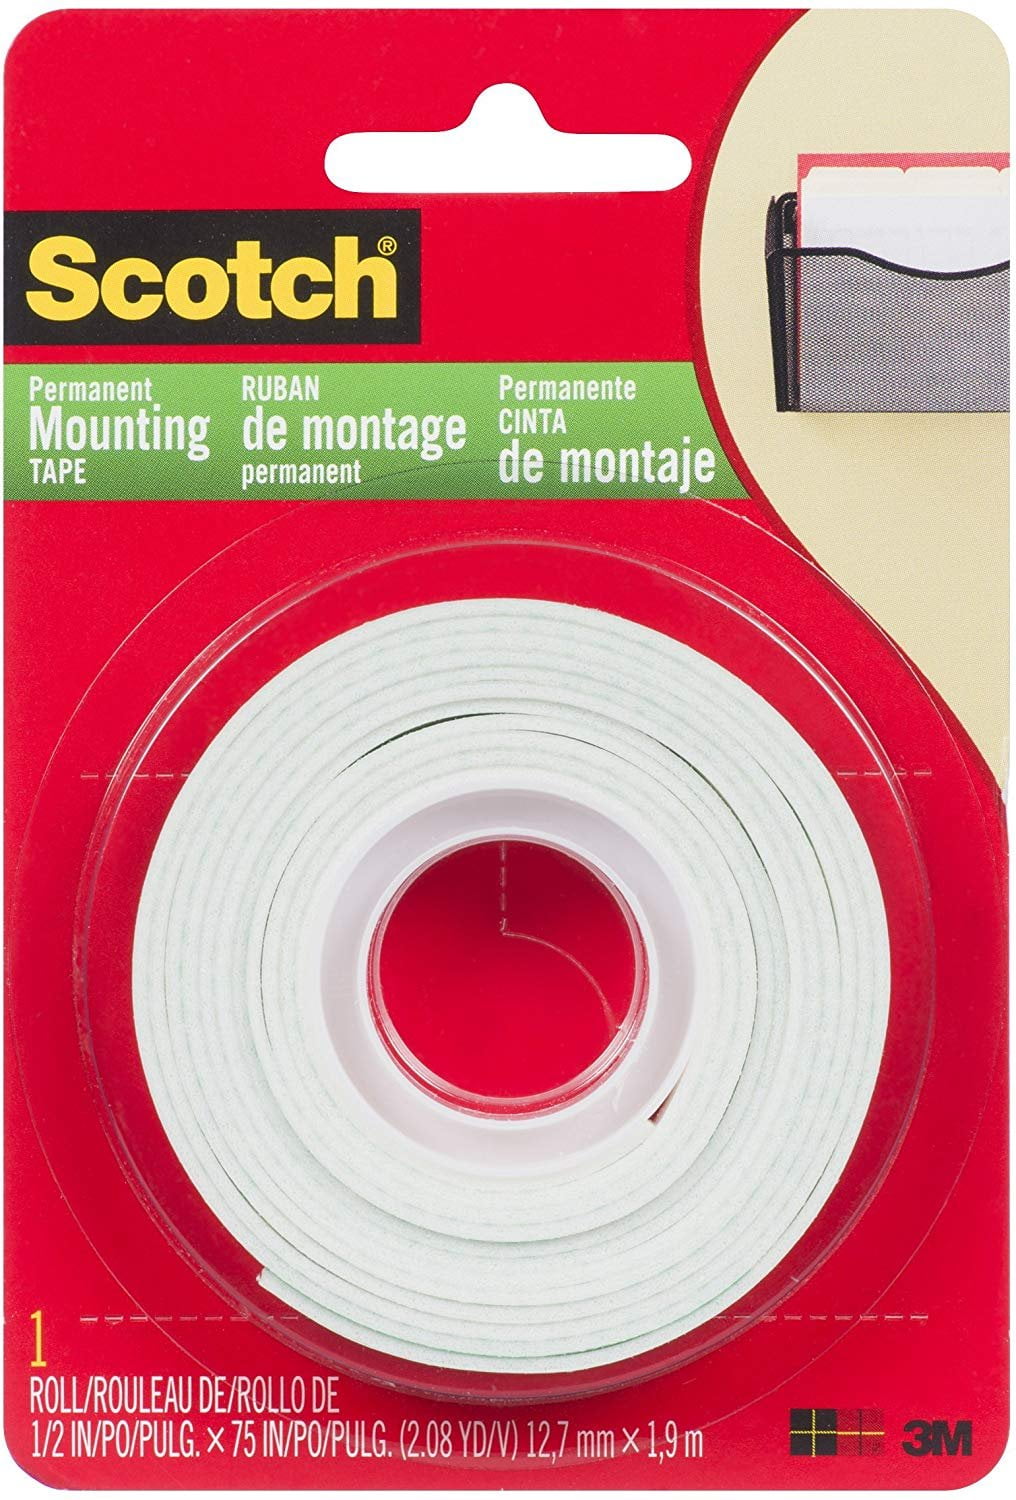 3M Scotch Indoor Mounting Tape .5 x 75 inch Pack of 10 